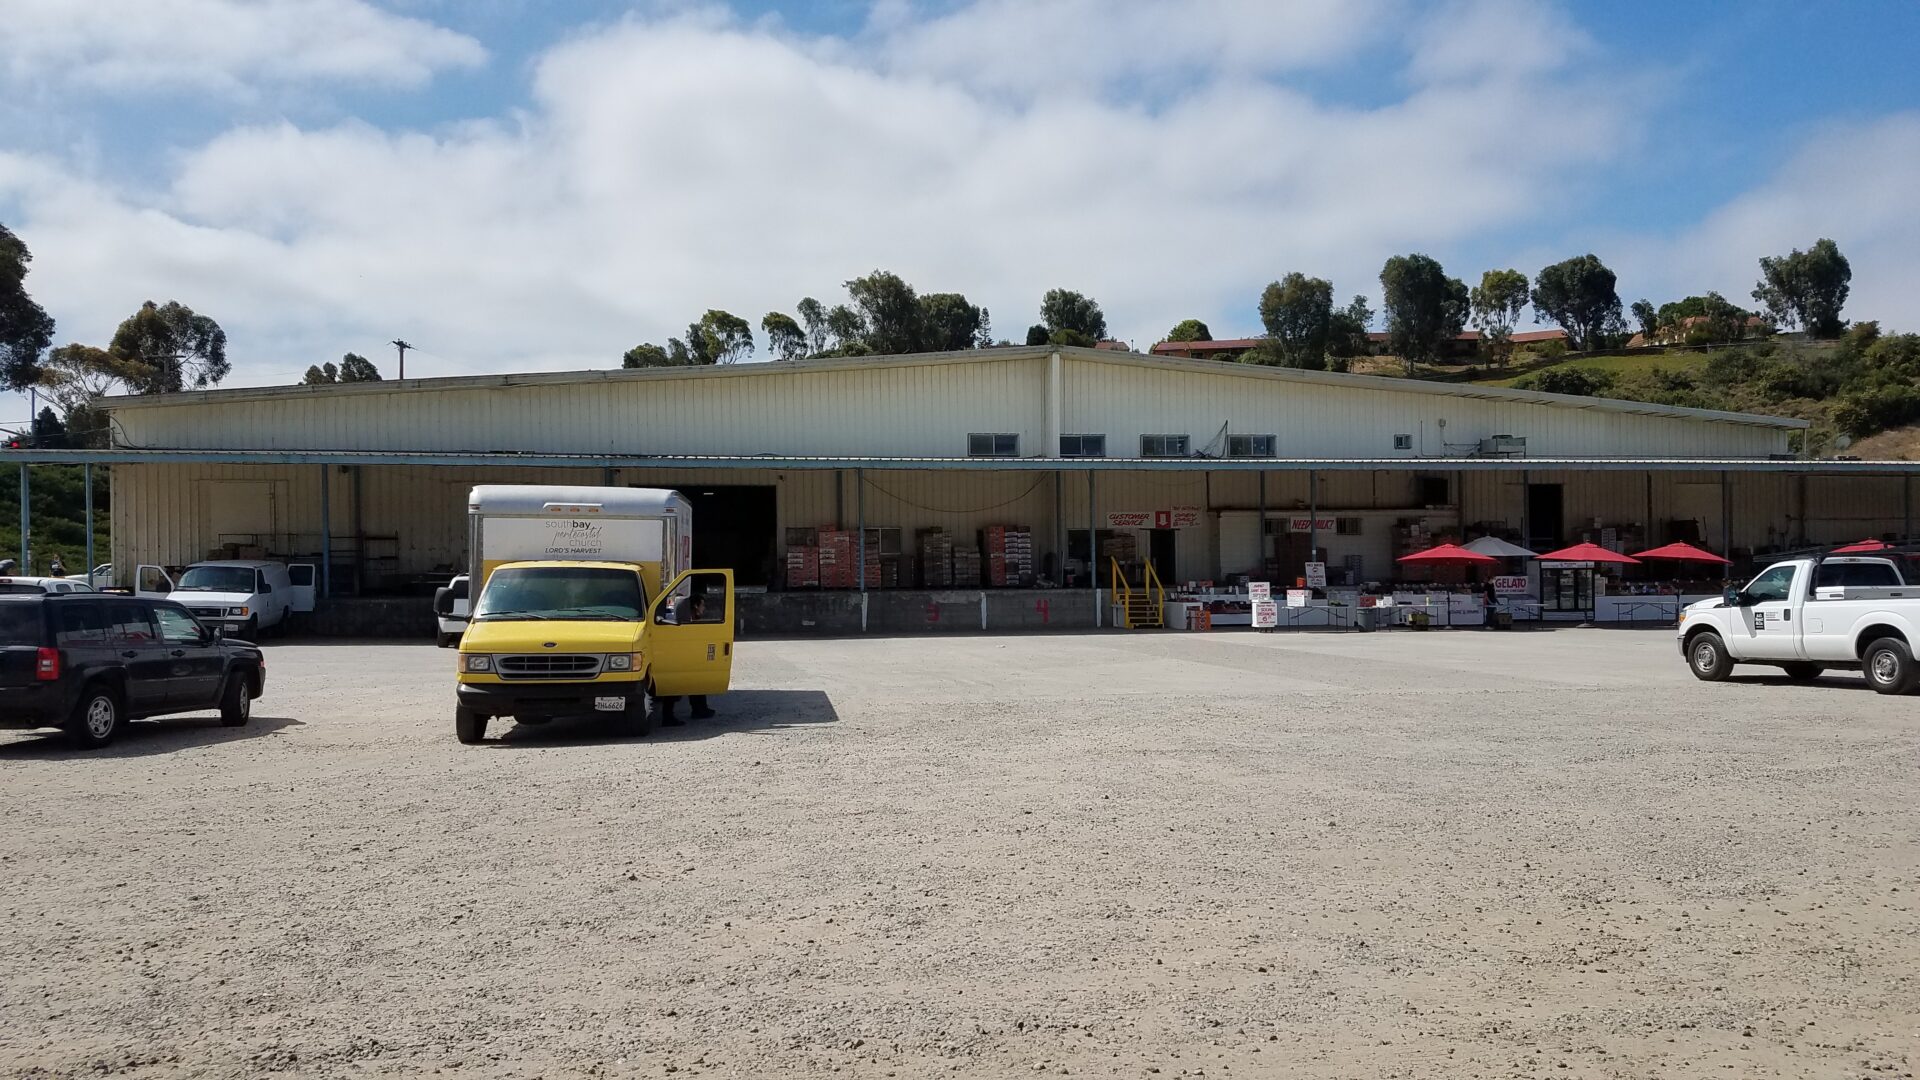 A yellow truck parked in front of a building.